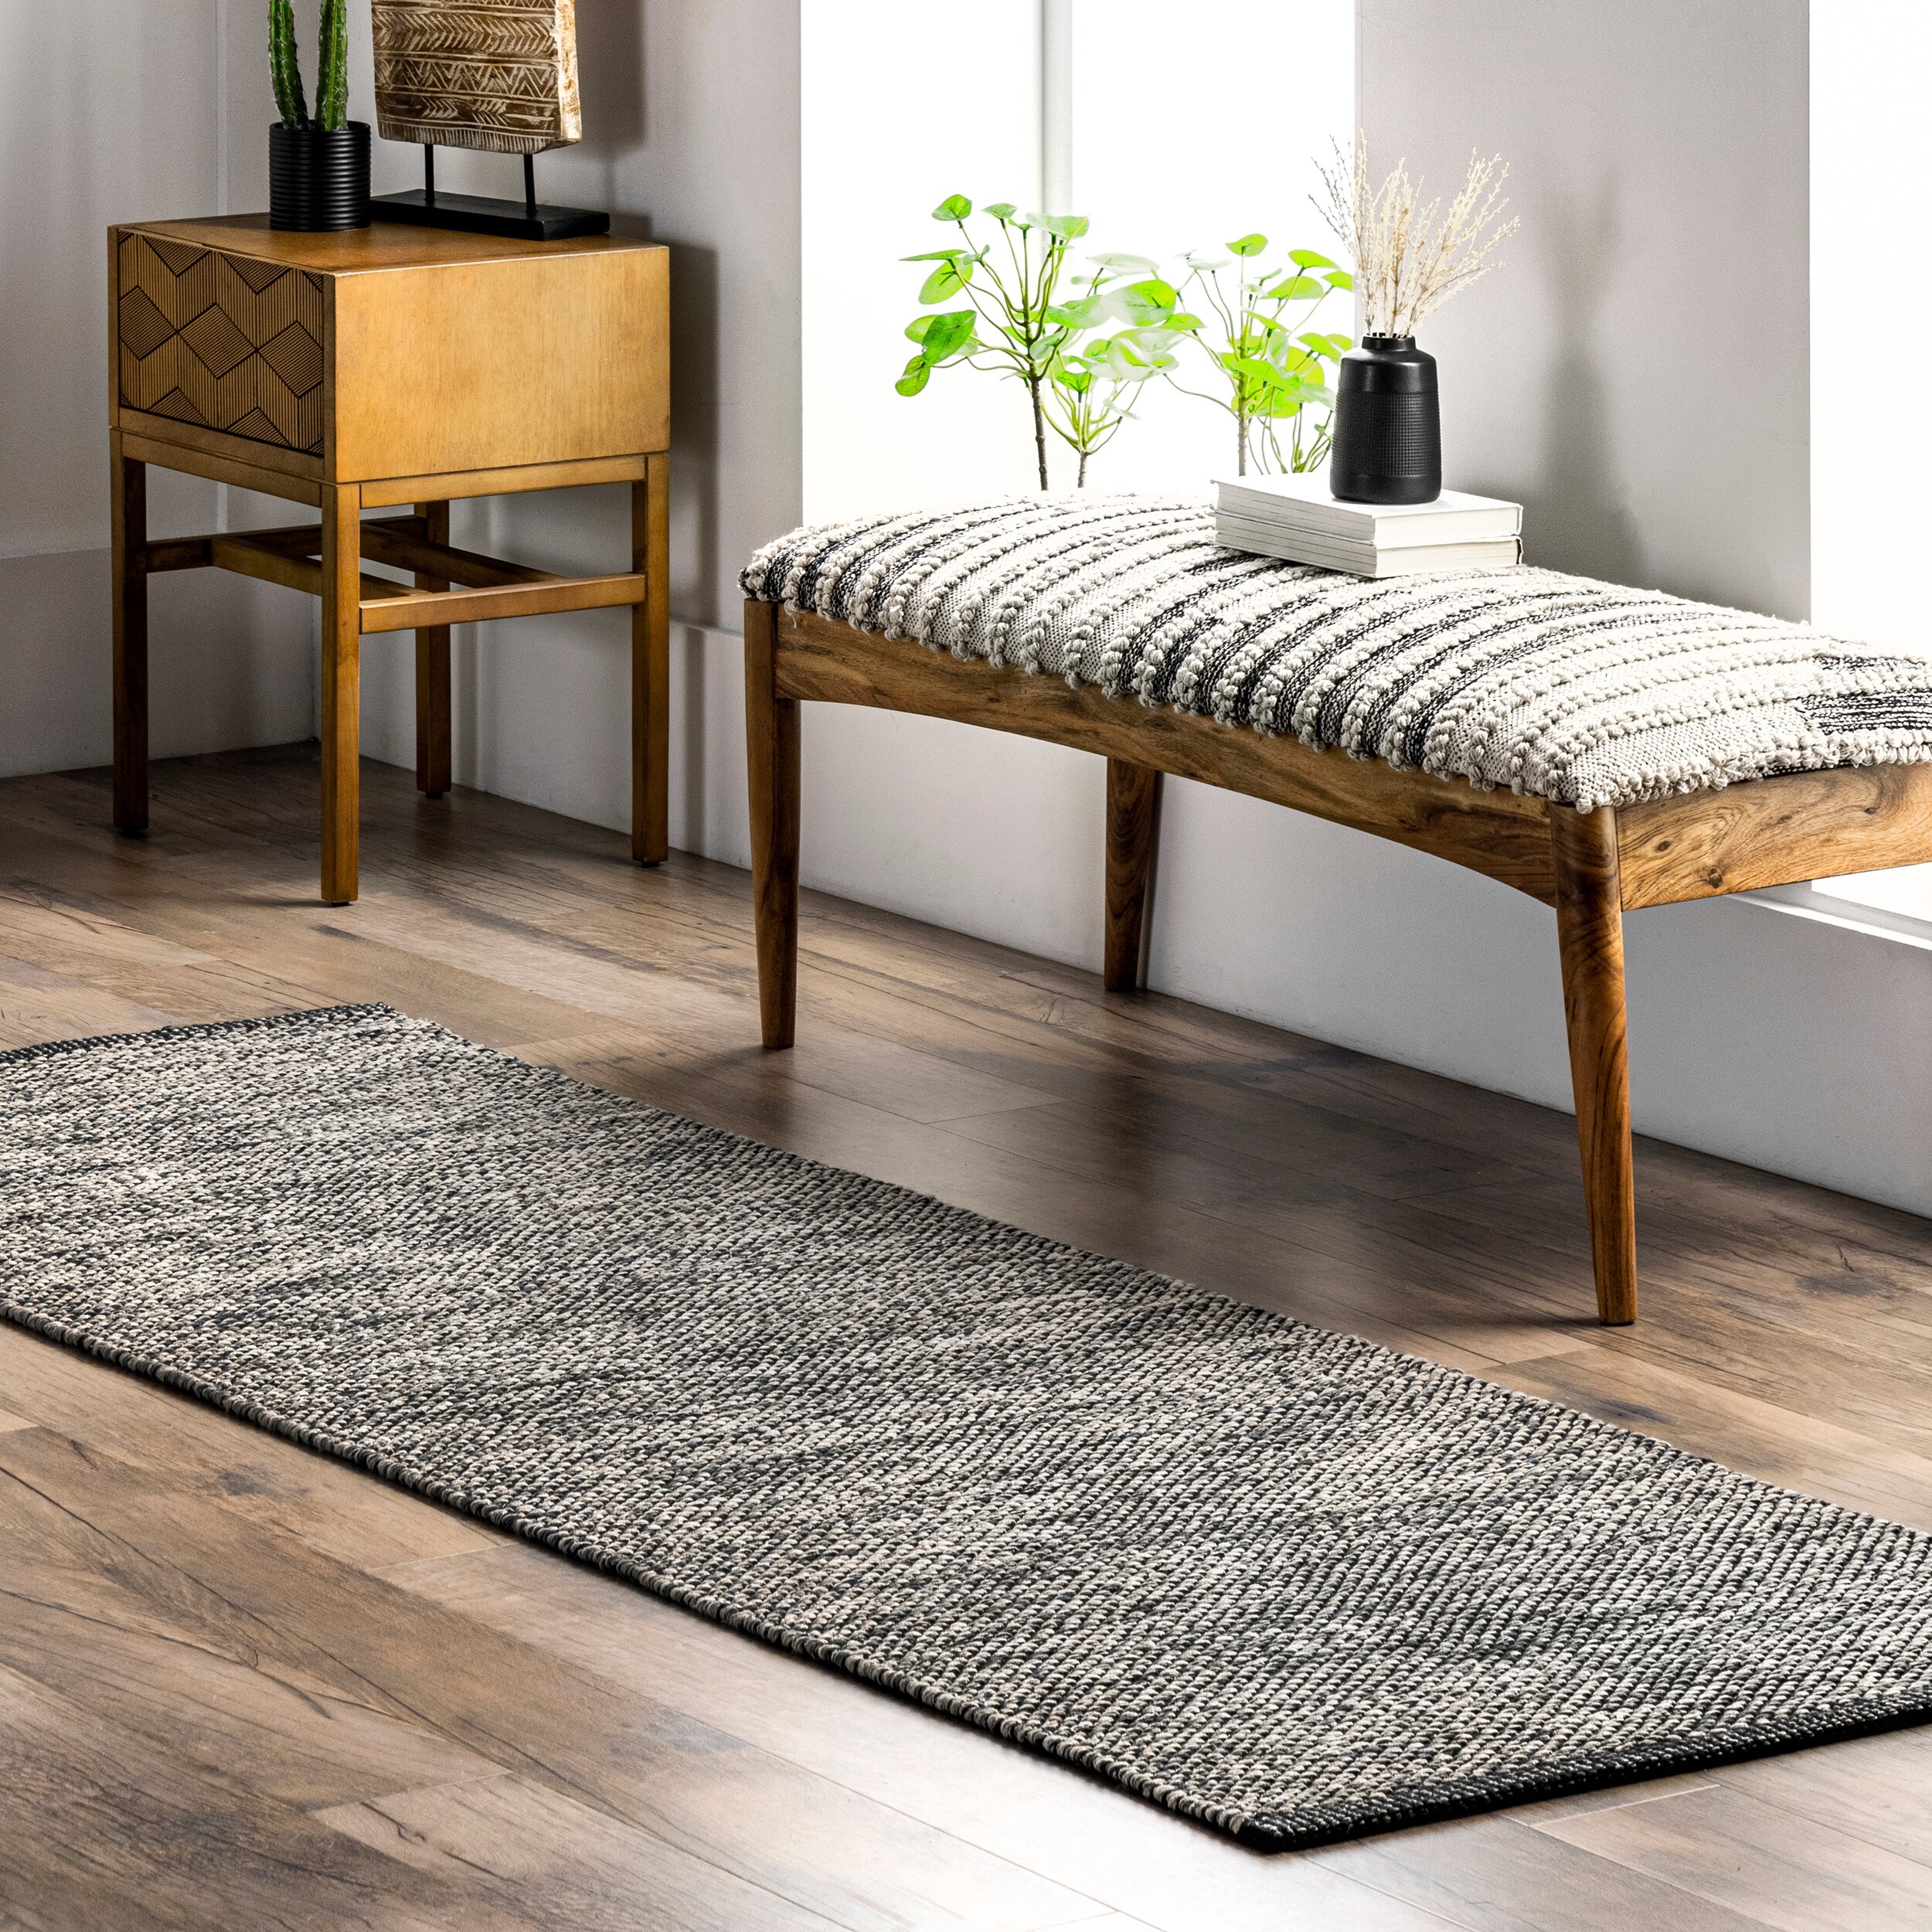 https://ak1.ostkcdn.com/images/products/is/images/direct/d441d11da3693c113bc138036144f9c04f6f0729/nuLOOM-Handmade-Flatweave-Contemporary-Cotton-Area-Rug.jpg